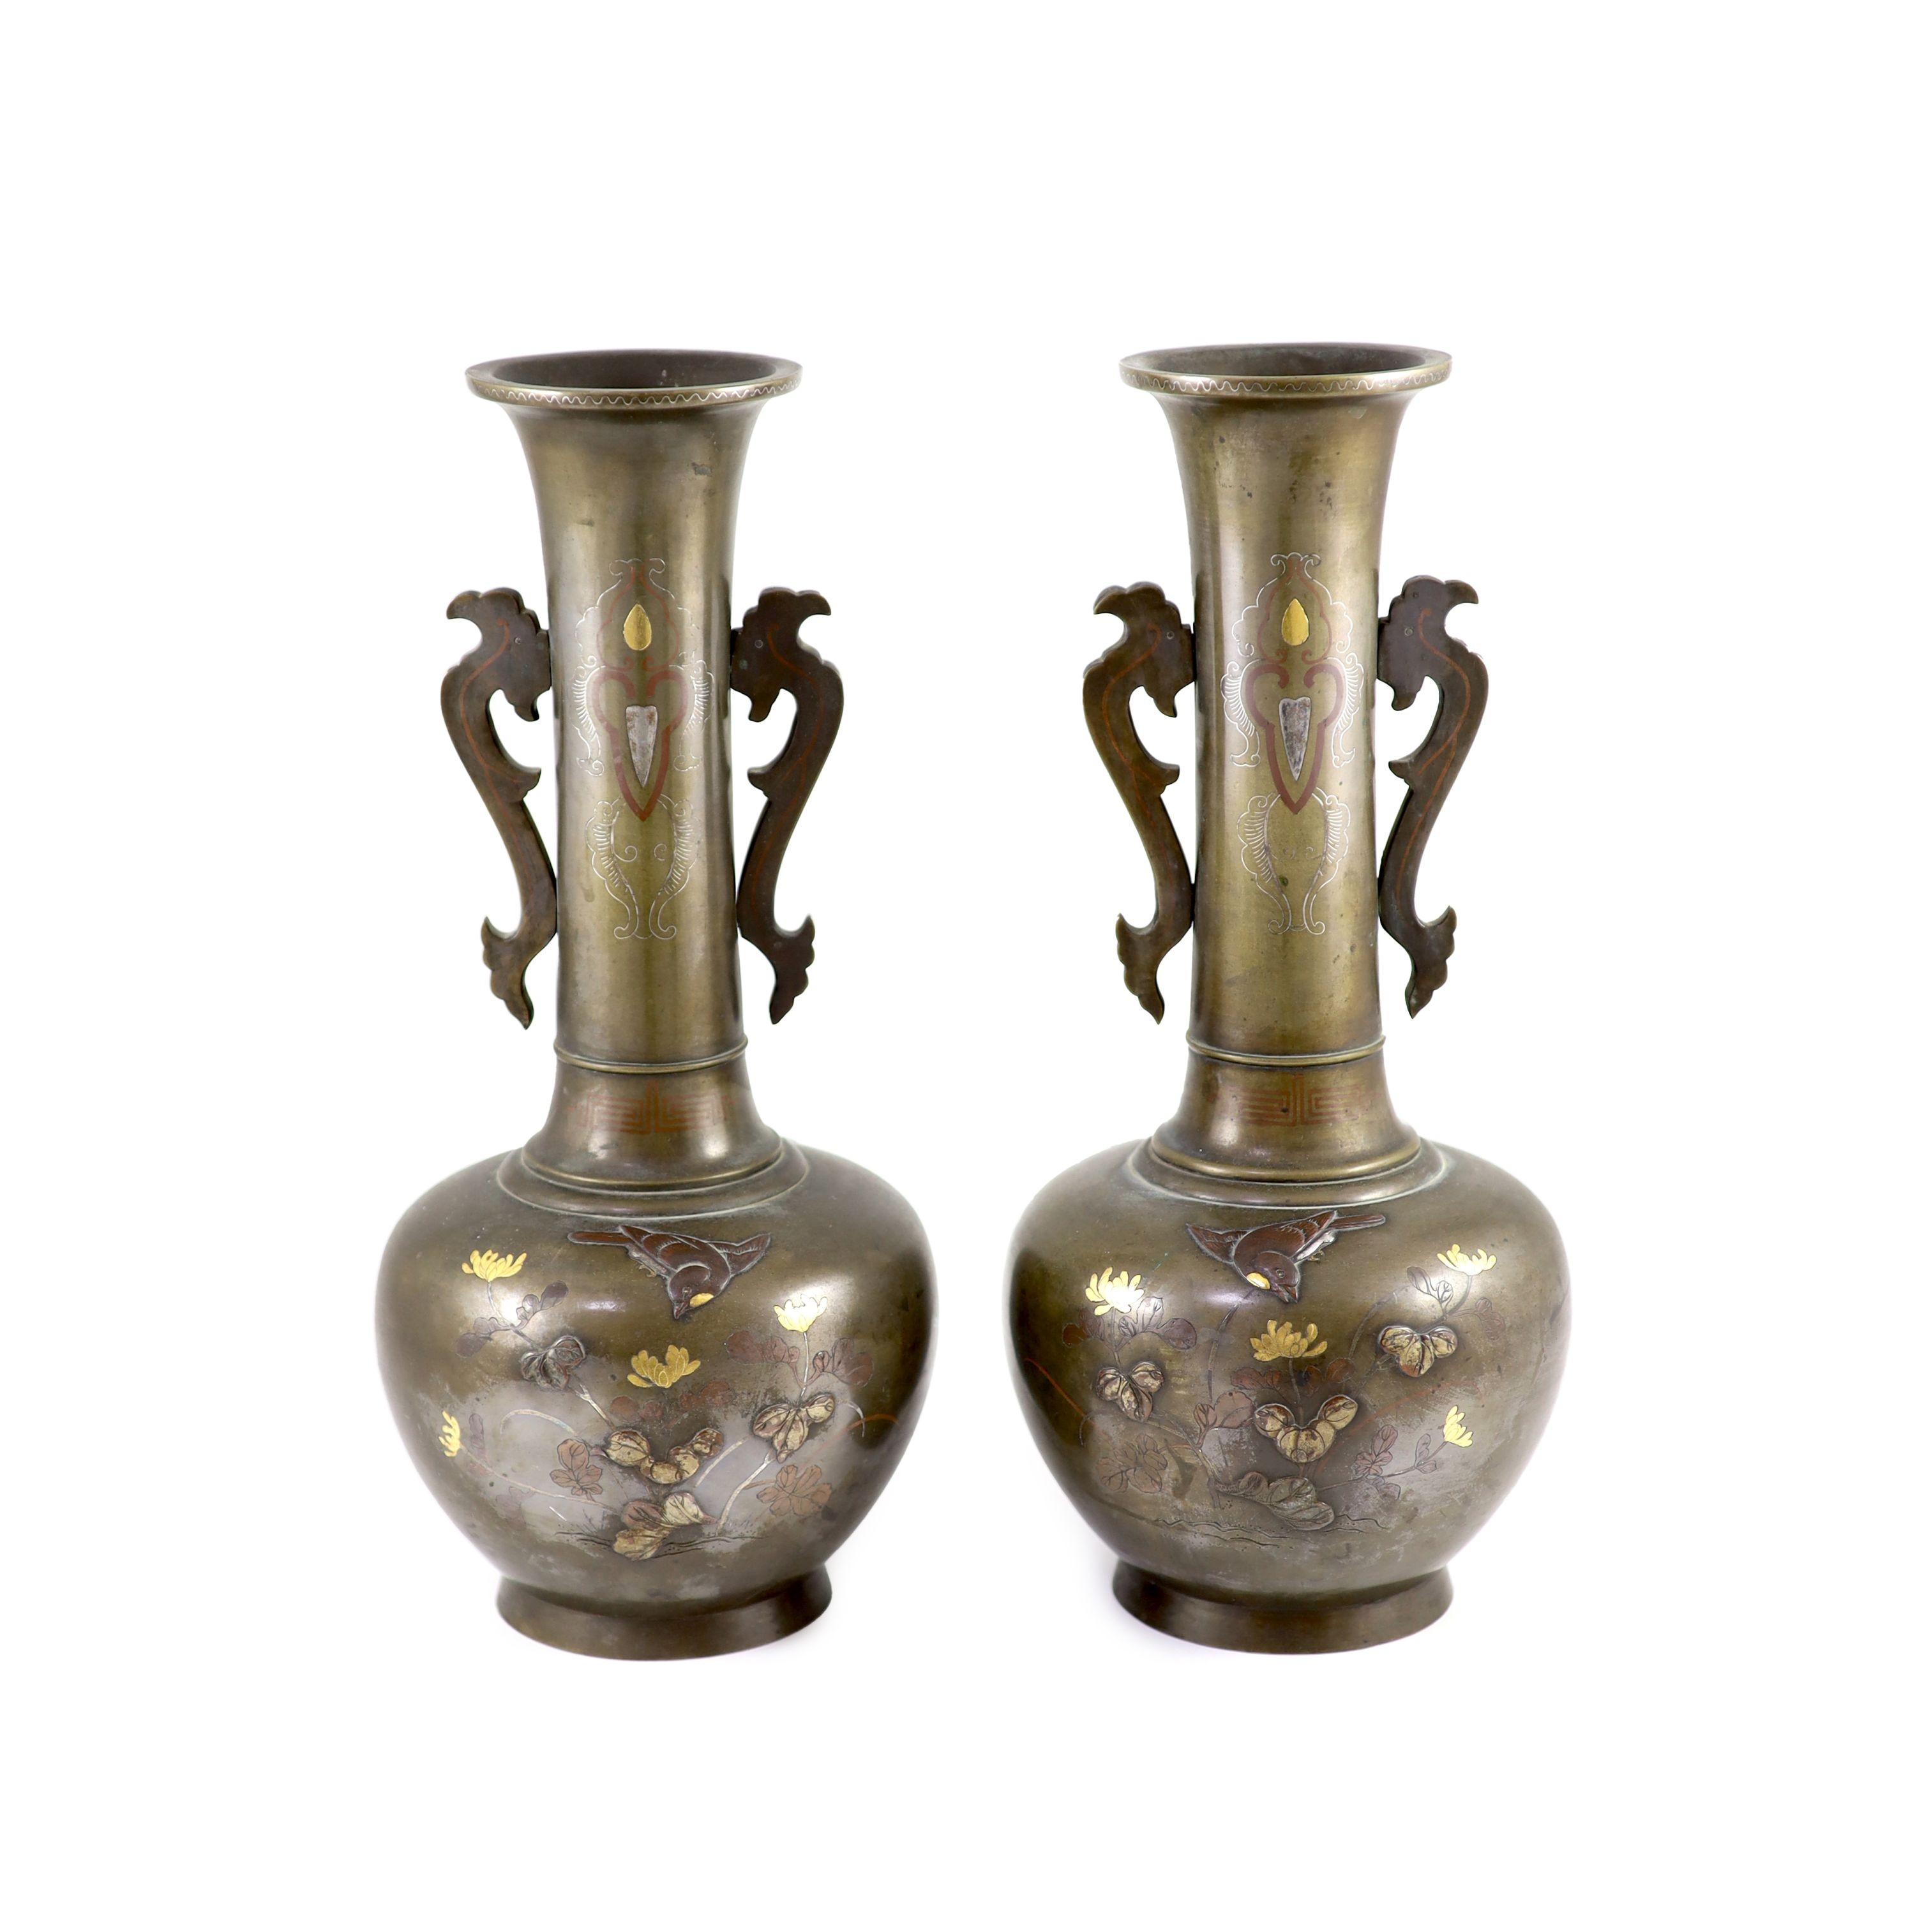 A pair of Japanese bronze and mixed metal bottle vases, Meiji period, 36cm high, patchy patina